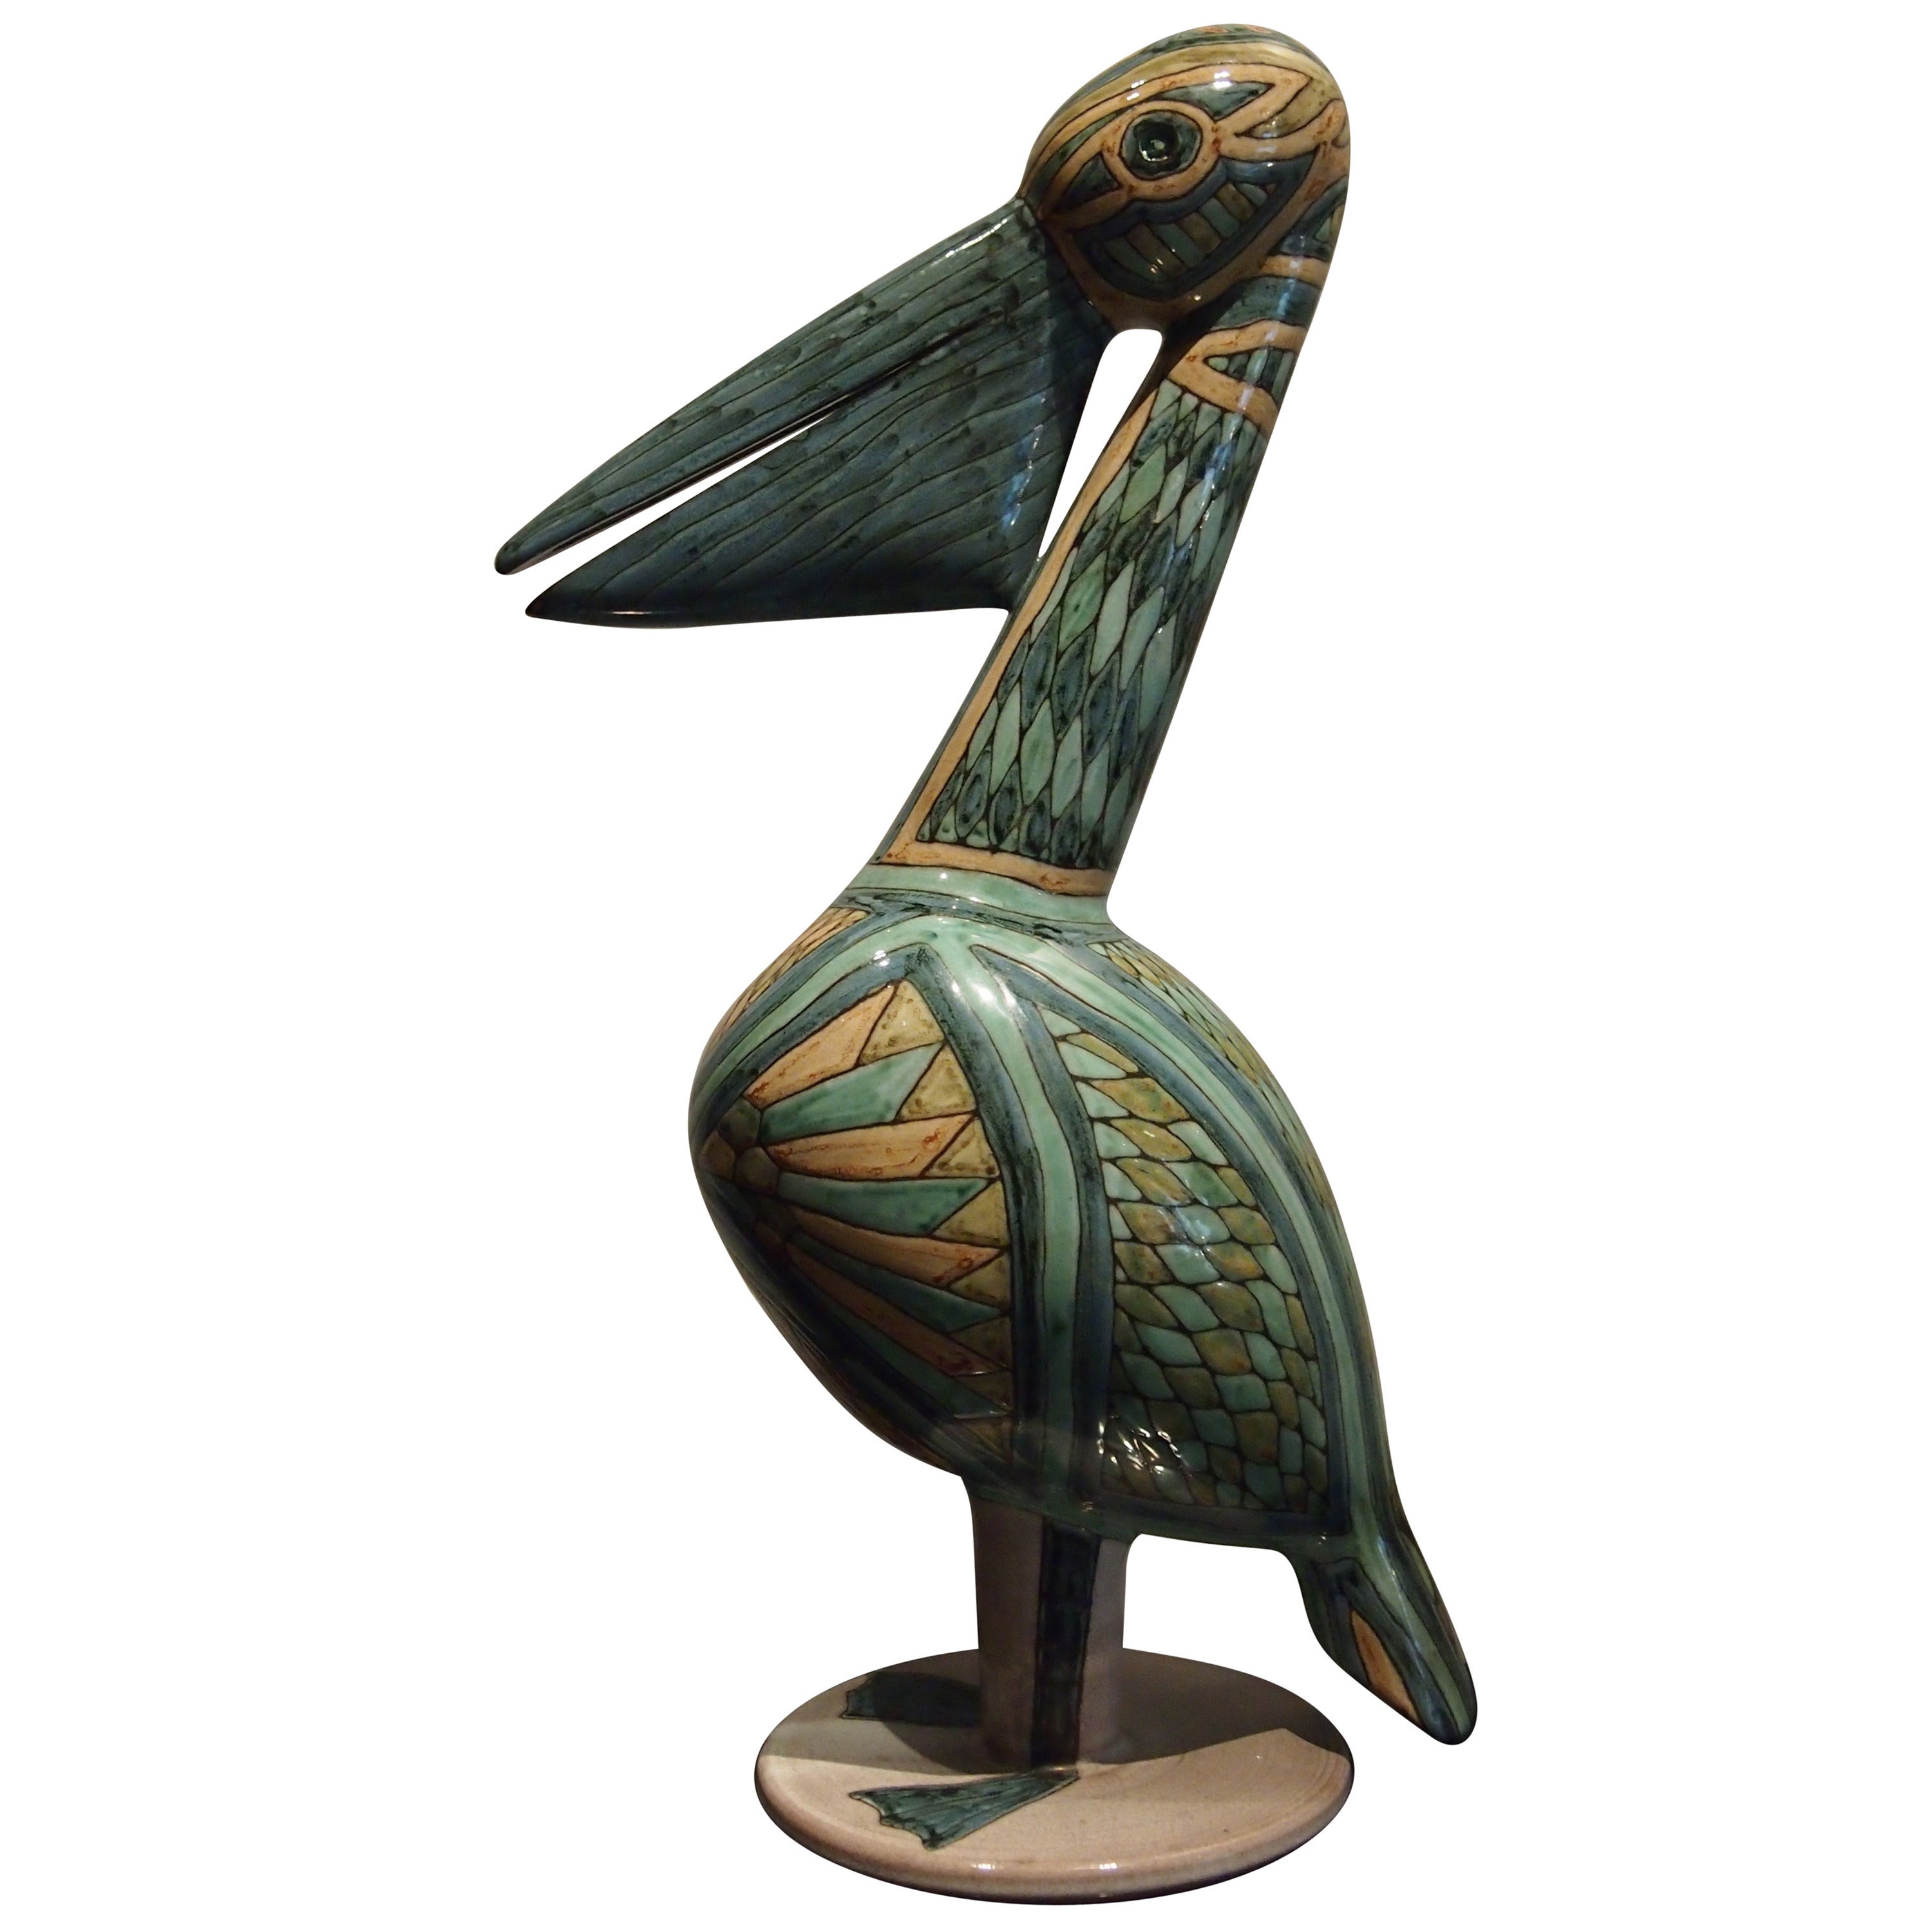 Pelican Ceramic Sculpture with Cloisonné Enamel, French, 1960